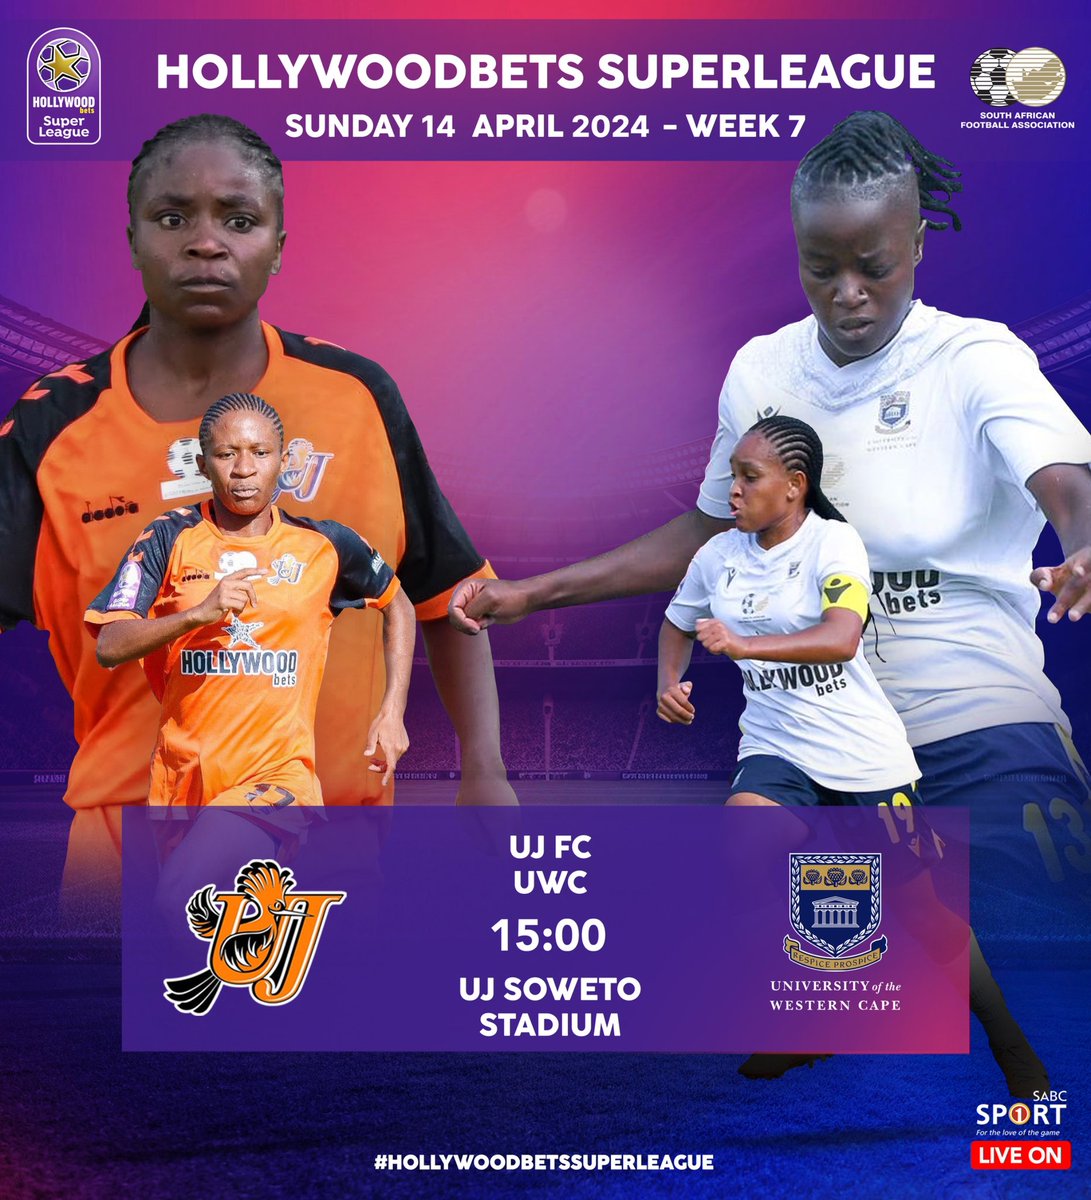 🔥🔥🔥match this afternoon in #HollywoodbetsSuperLeague 

@ujfootball host @UWCFootball at the UJ Soweto Campus at 15h00

Catch the action live on @Official_SABC1 

#BekeLeBekeSL